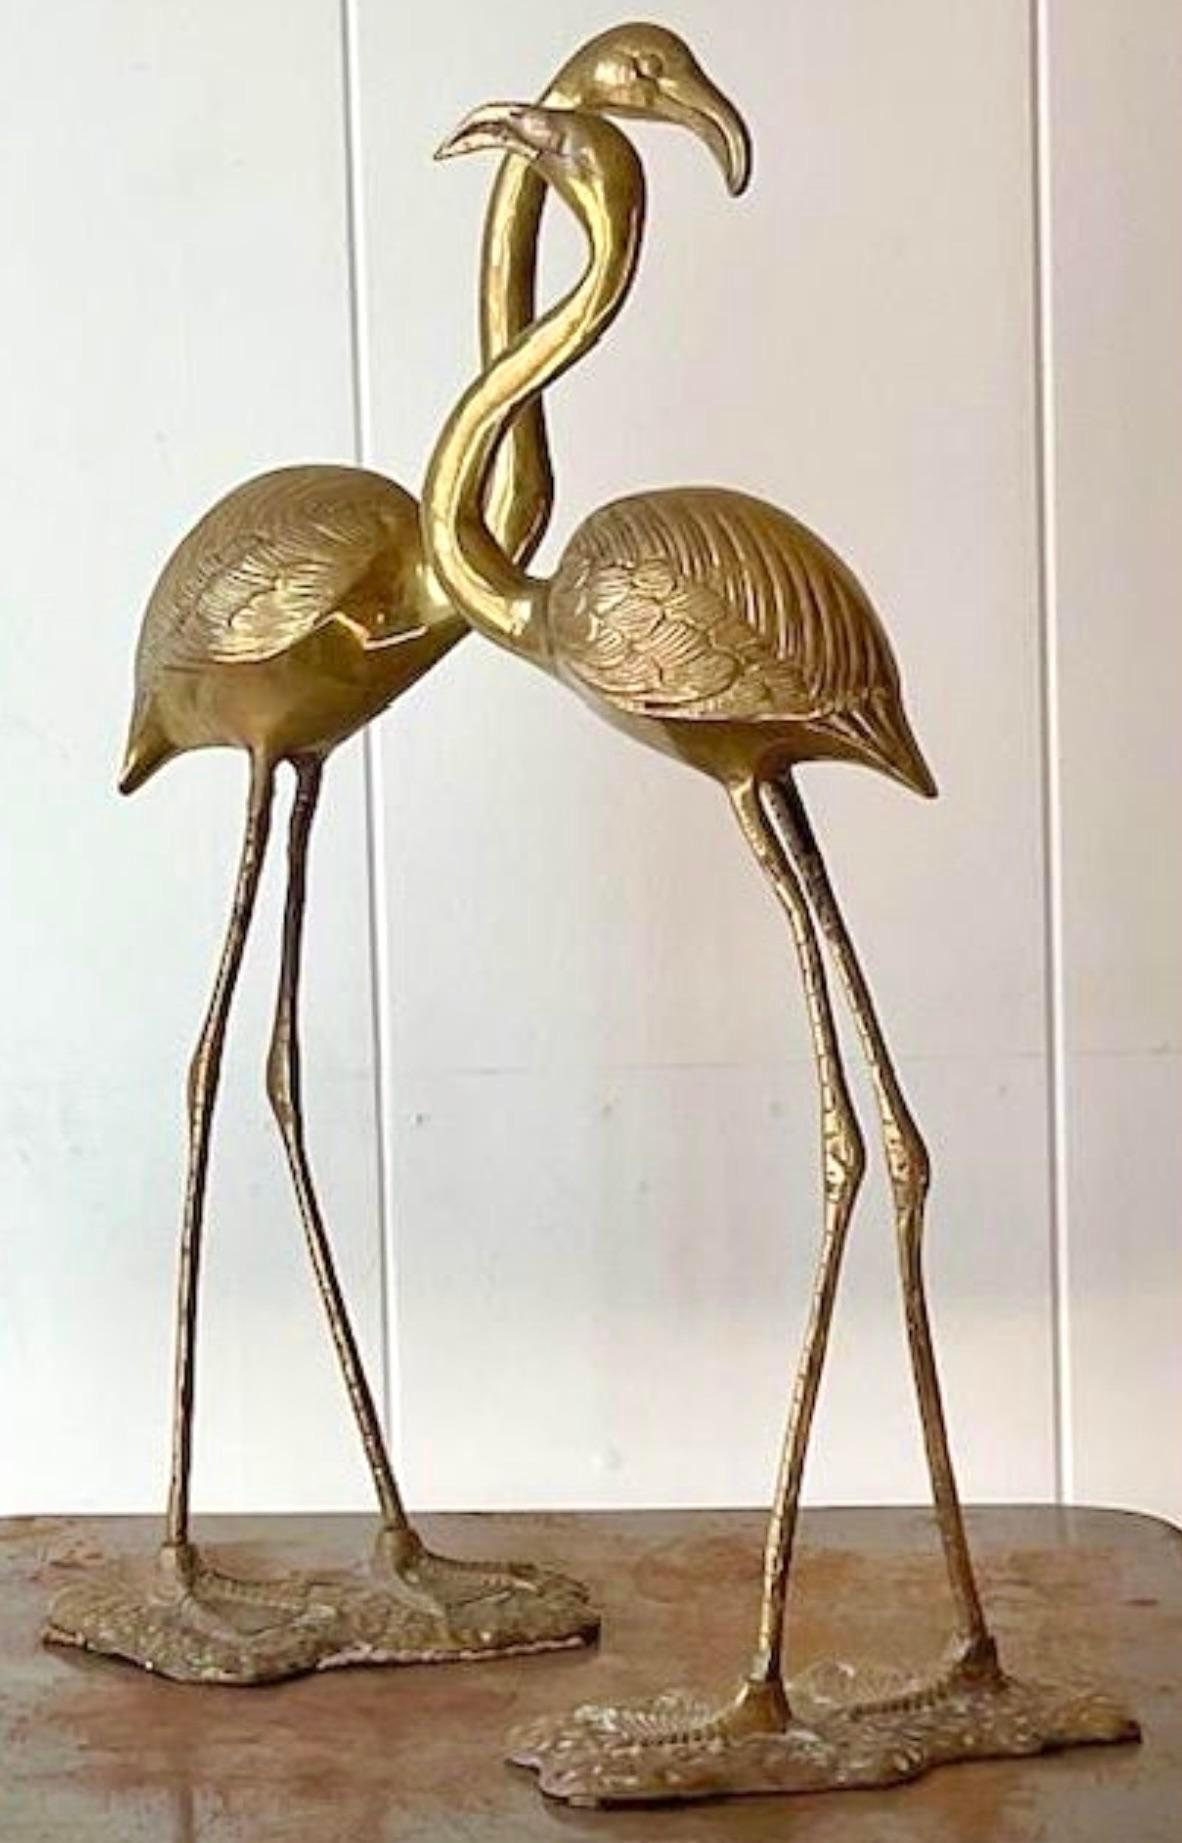 American Vintage Coastal 1960s Solid Brass Flamingos - a Pair For Sale